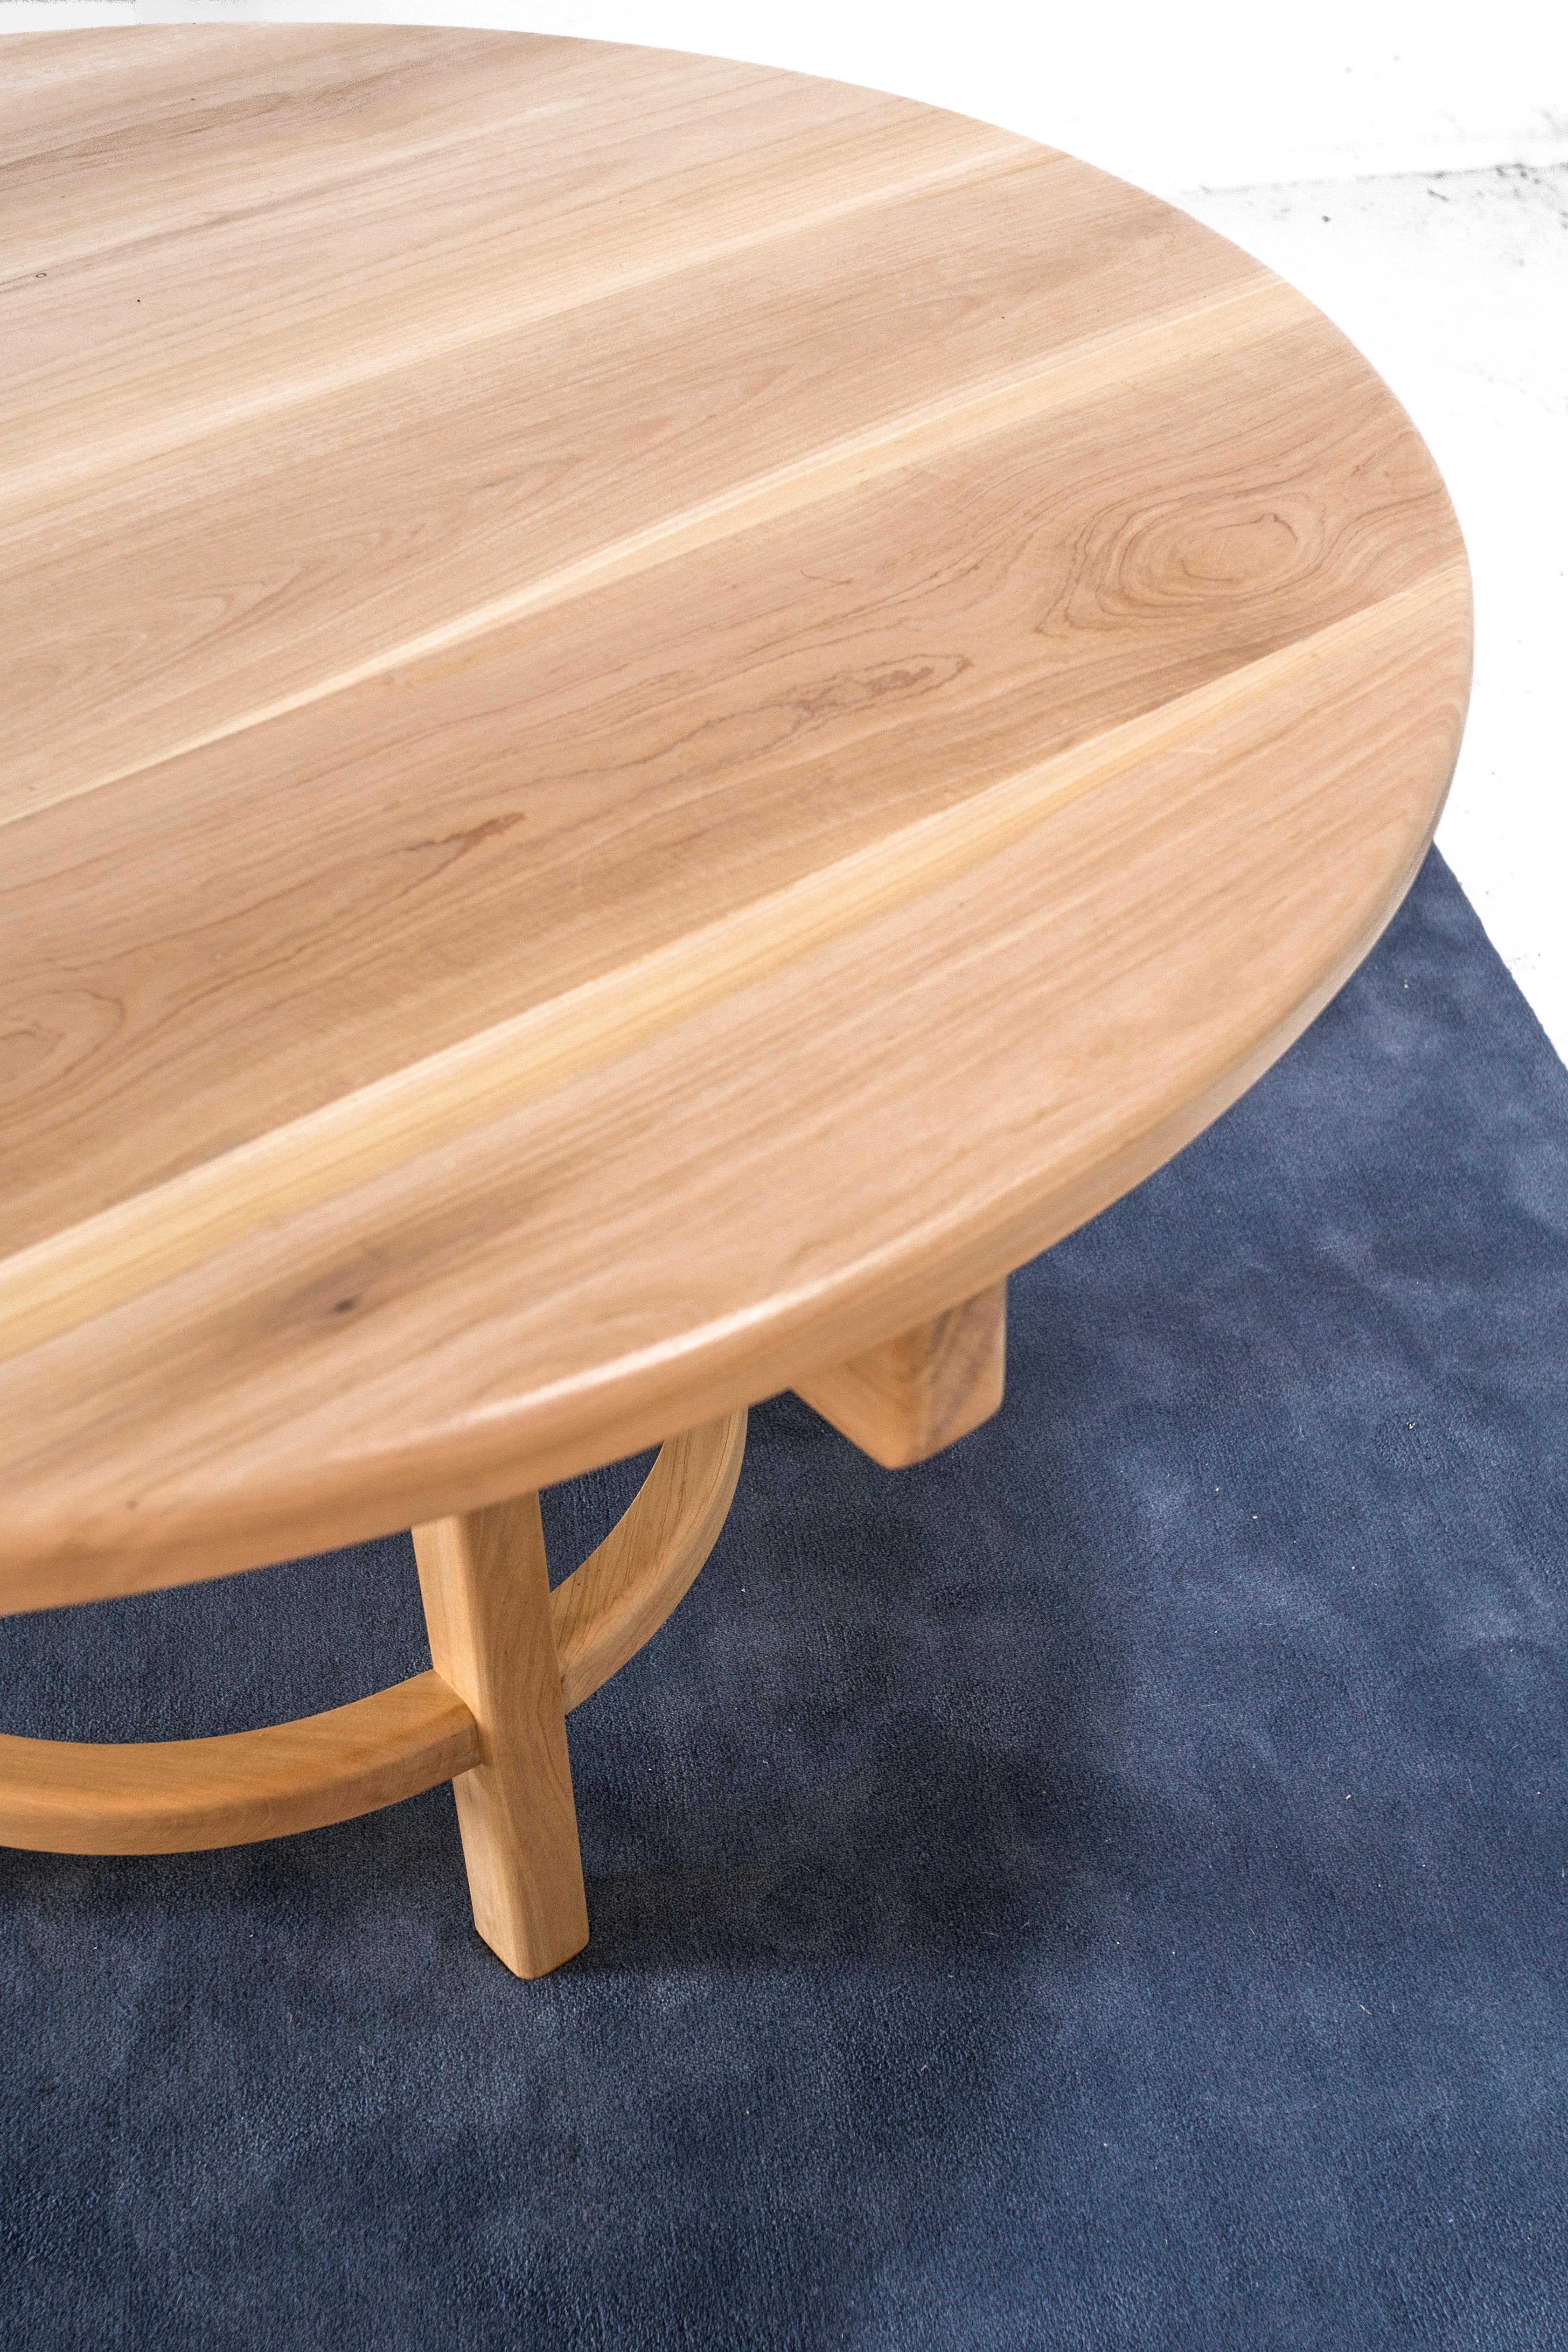 Wood Orno Round Dining Table by Ries